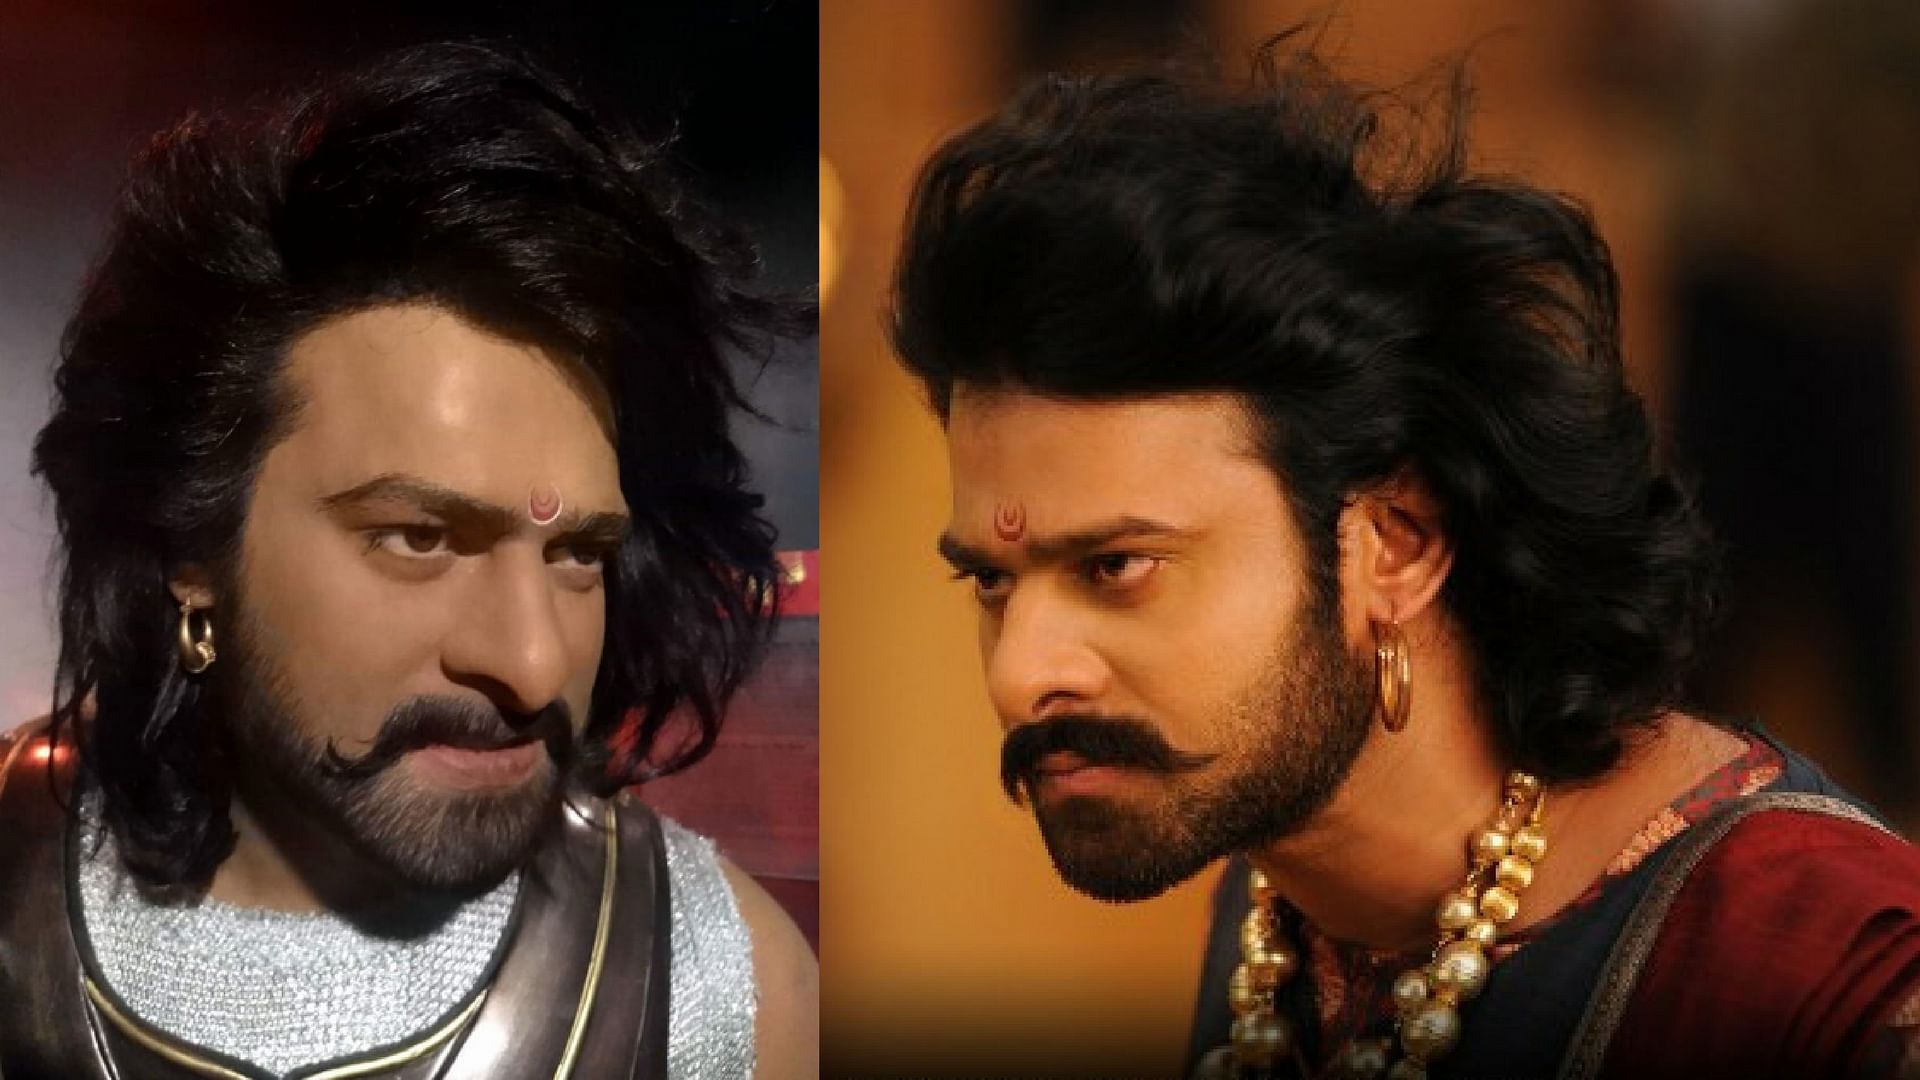 ‘Baahubali’ actor Prabhas becomes the first south actor to get a wax tribute in Madame Tussauds musuem. (Photo courtesy: Twitter/@<a href="https://twitter.com/rameshlaus">@<b>rameshlaus</b></a>, Dharma Productions)&nbsp;